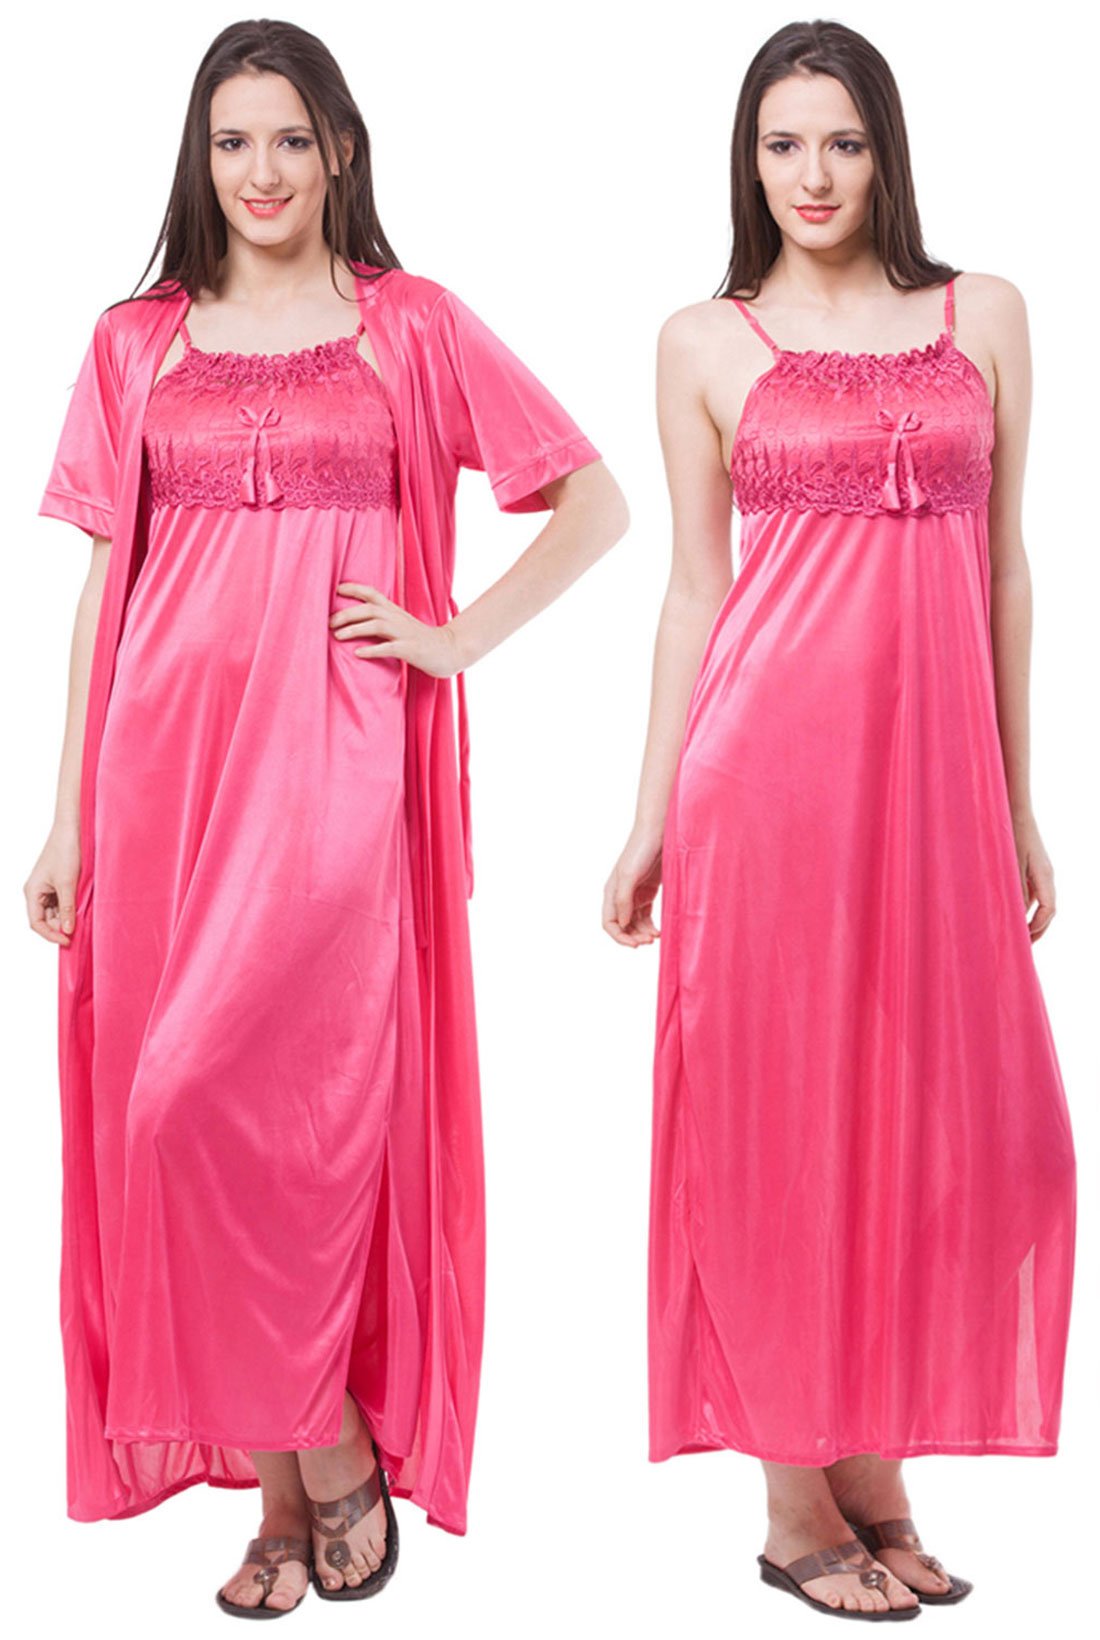 Pink / One Size Aria Satin Nightdress and Robe Clearance The Orange Tags